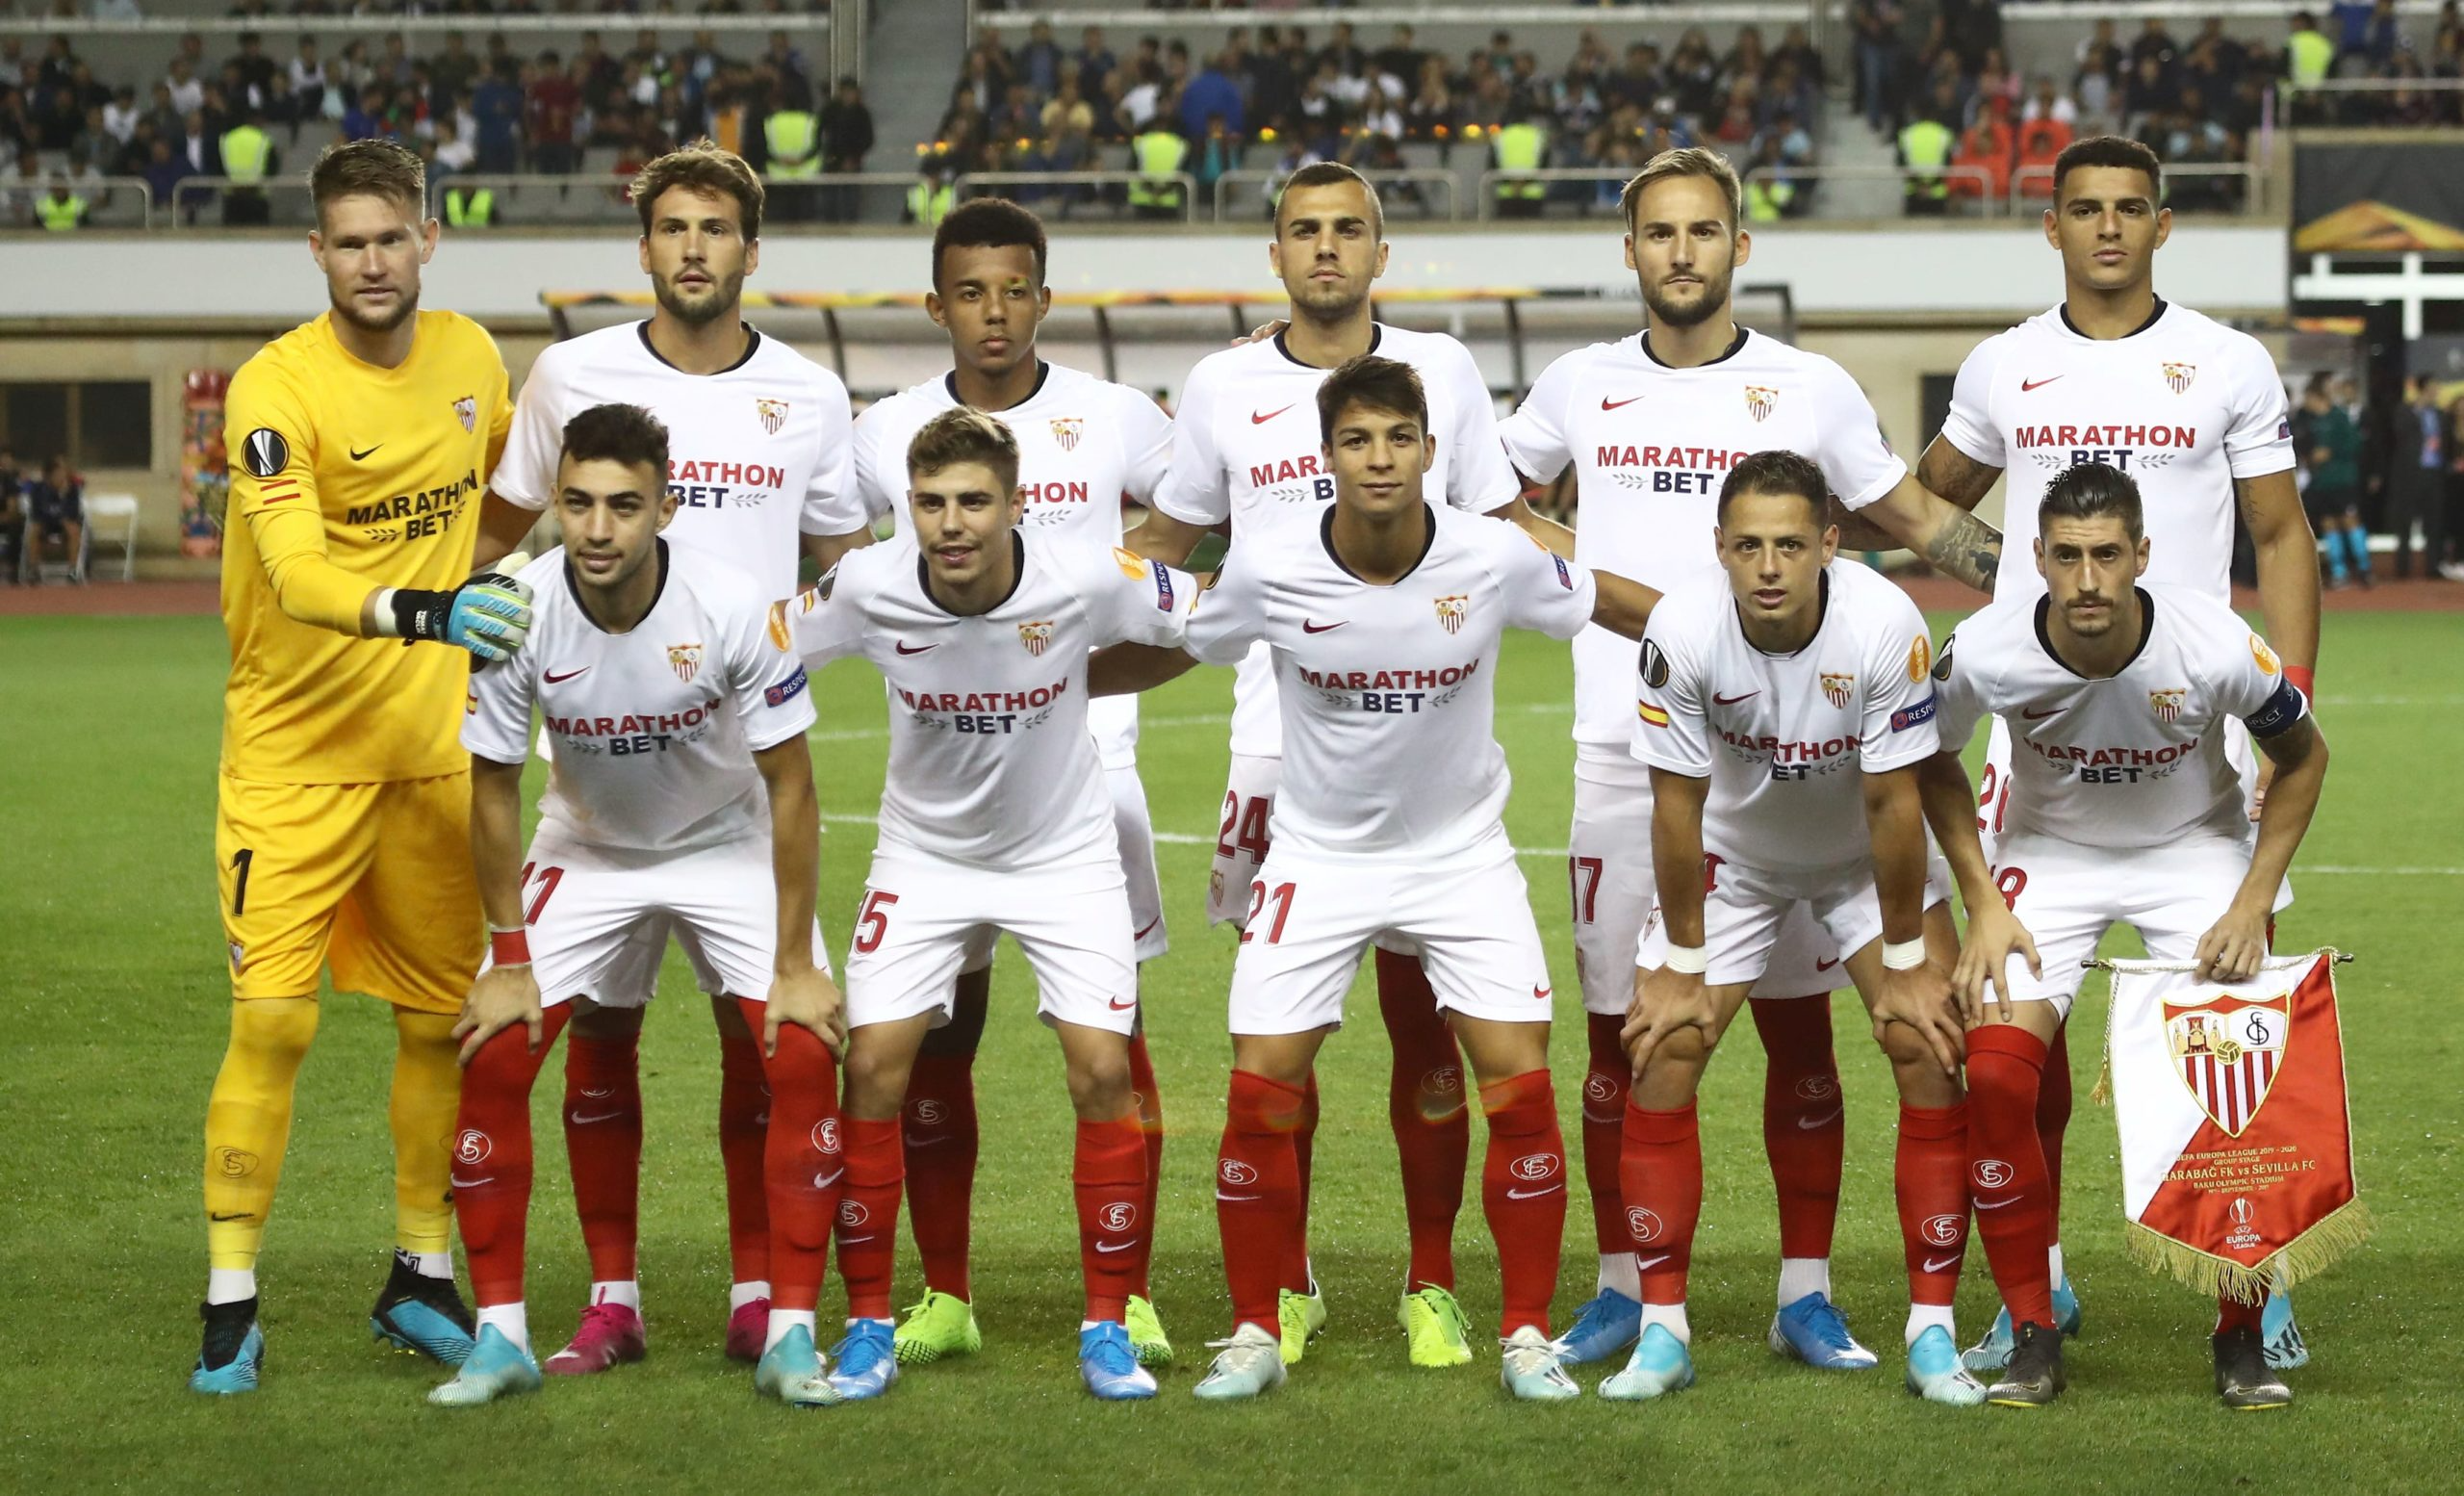 Sevilla in Debt of €90 Million, Puts All Players for Sale